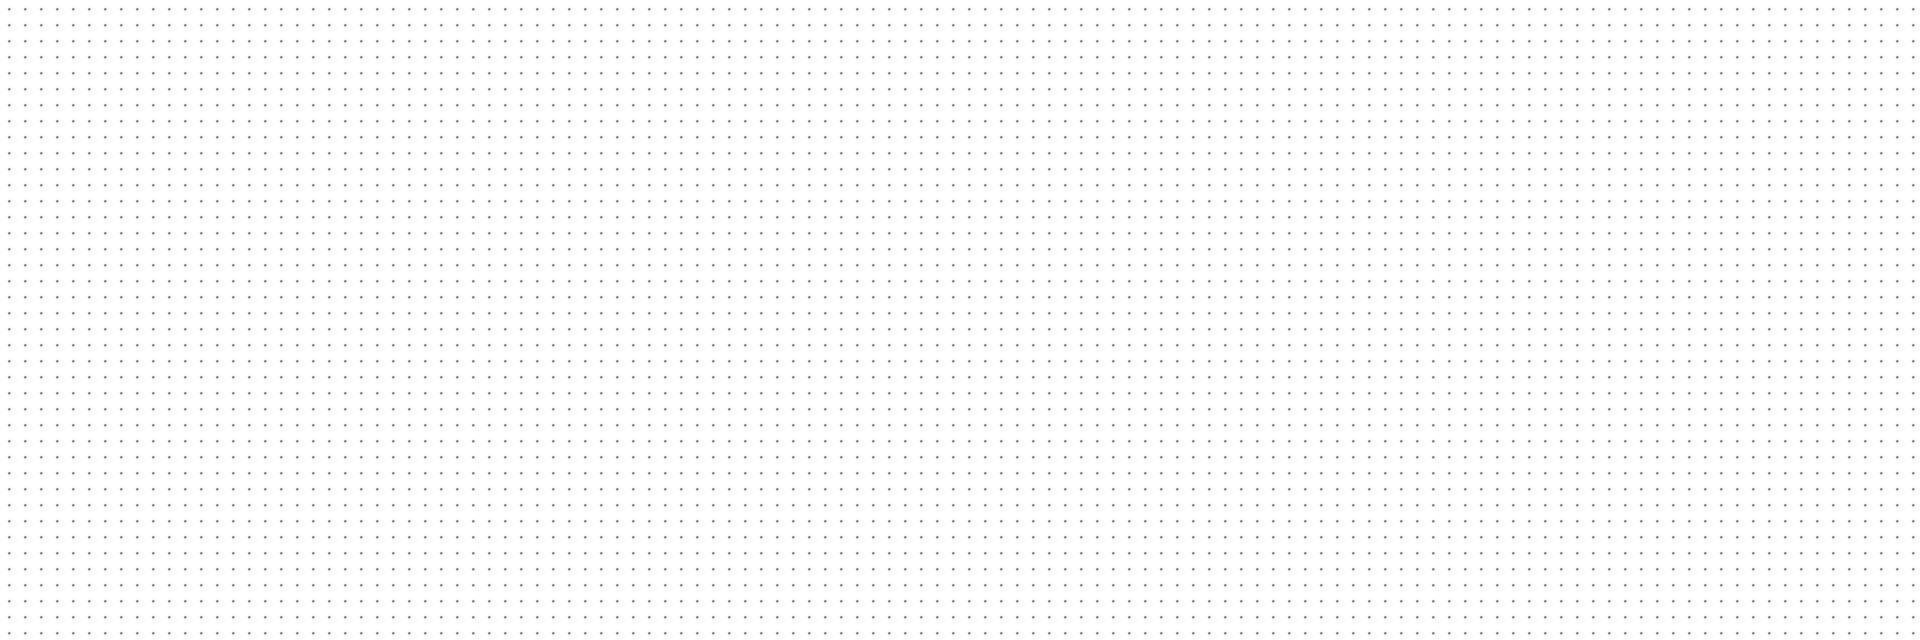 Dotted grid seamless pattern for bullet journal. Black point texture. Black dot grid for notebook paper. Vector illustration on white background